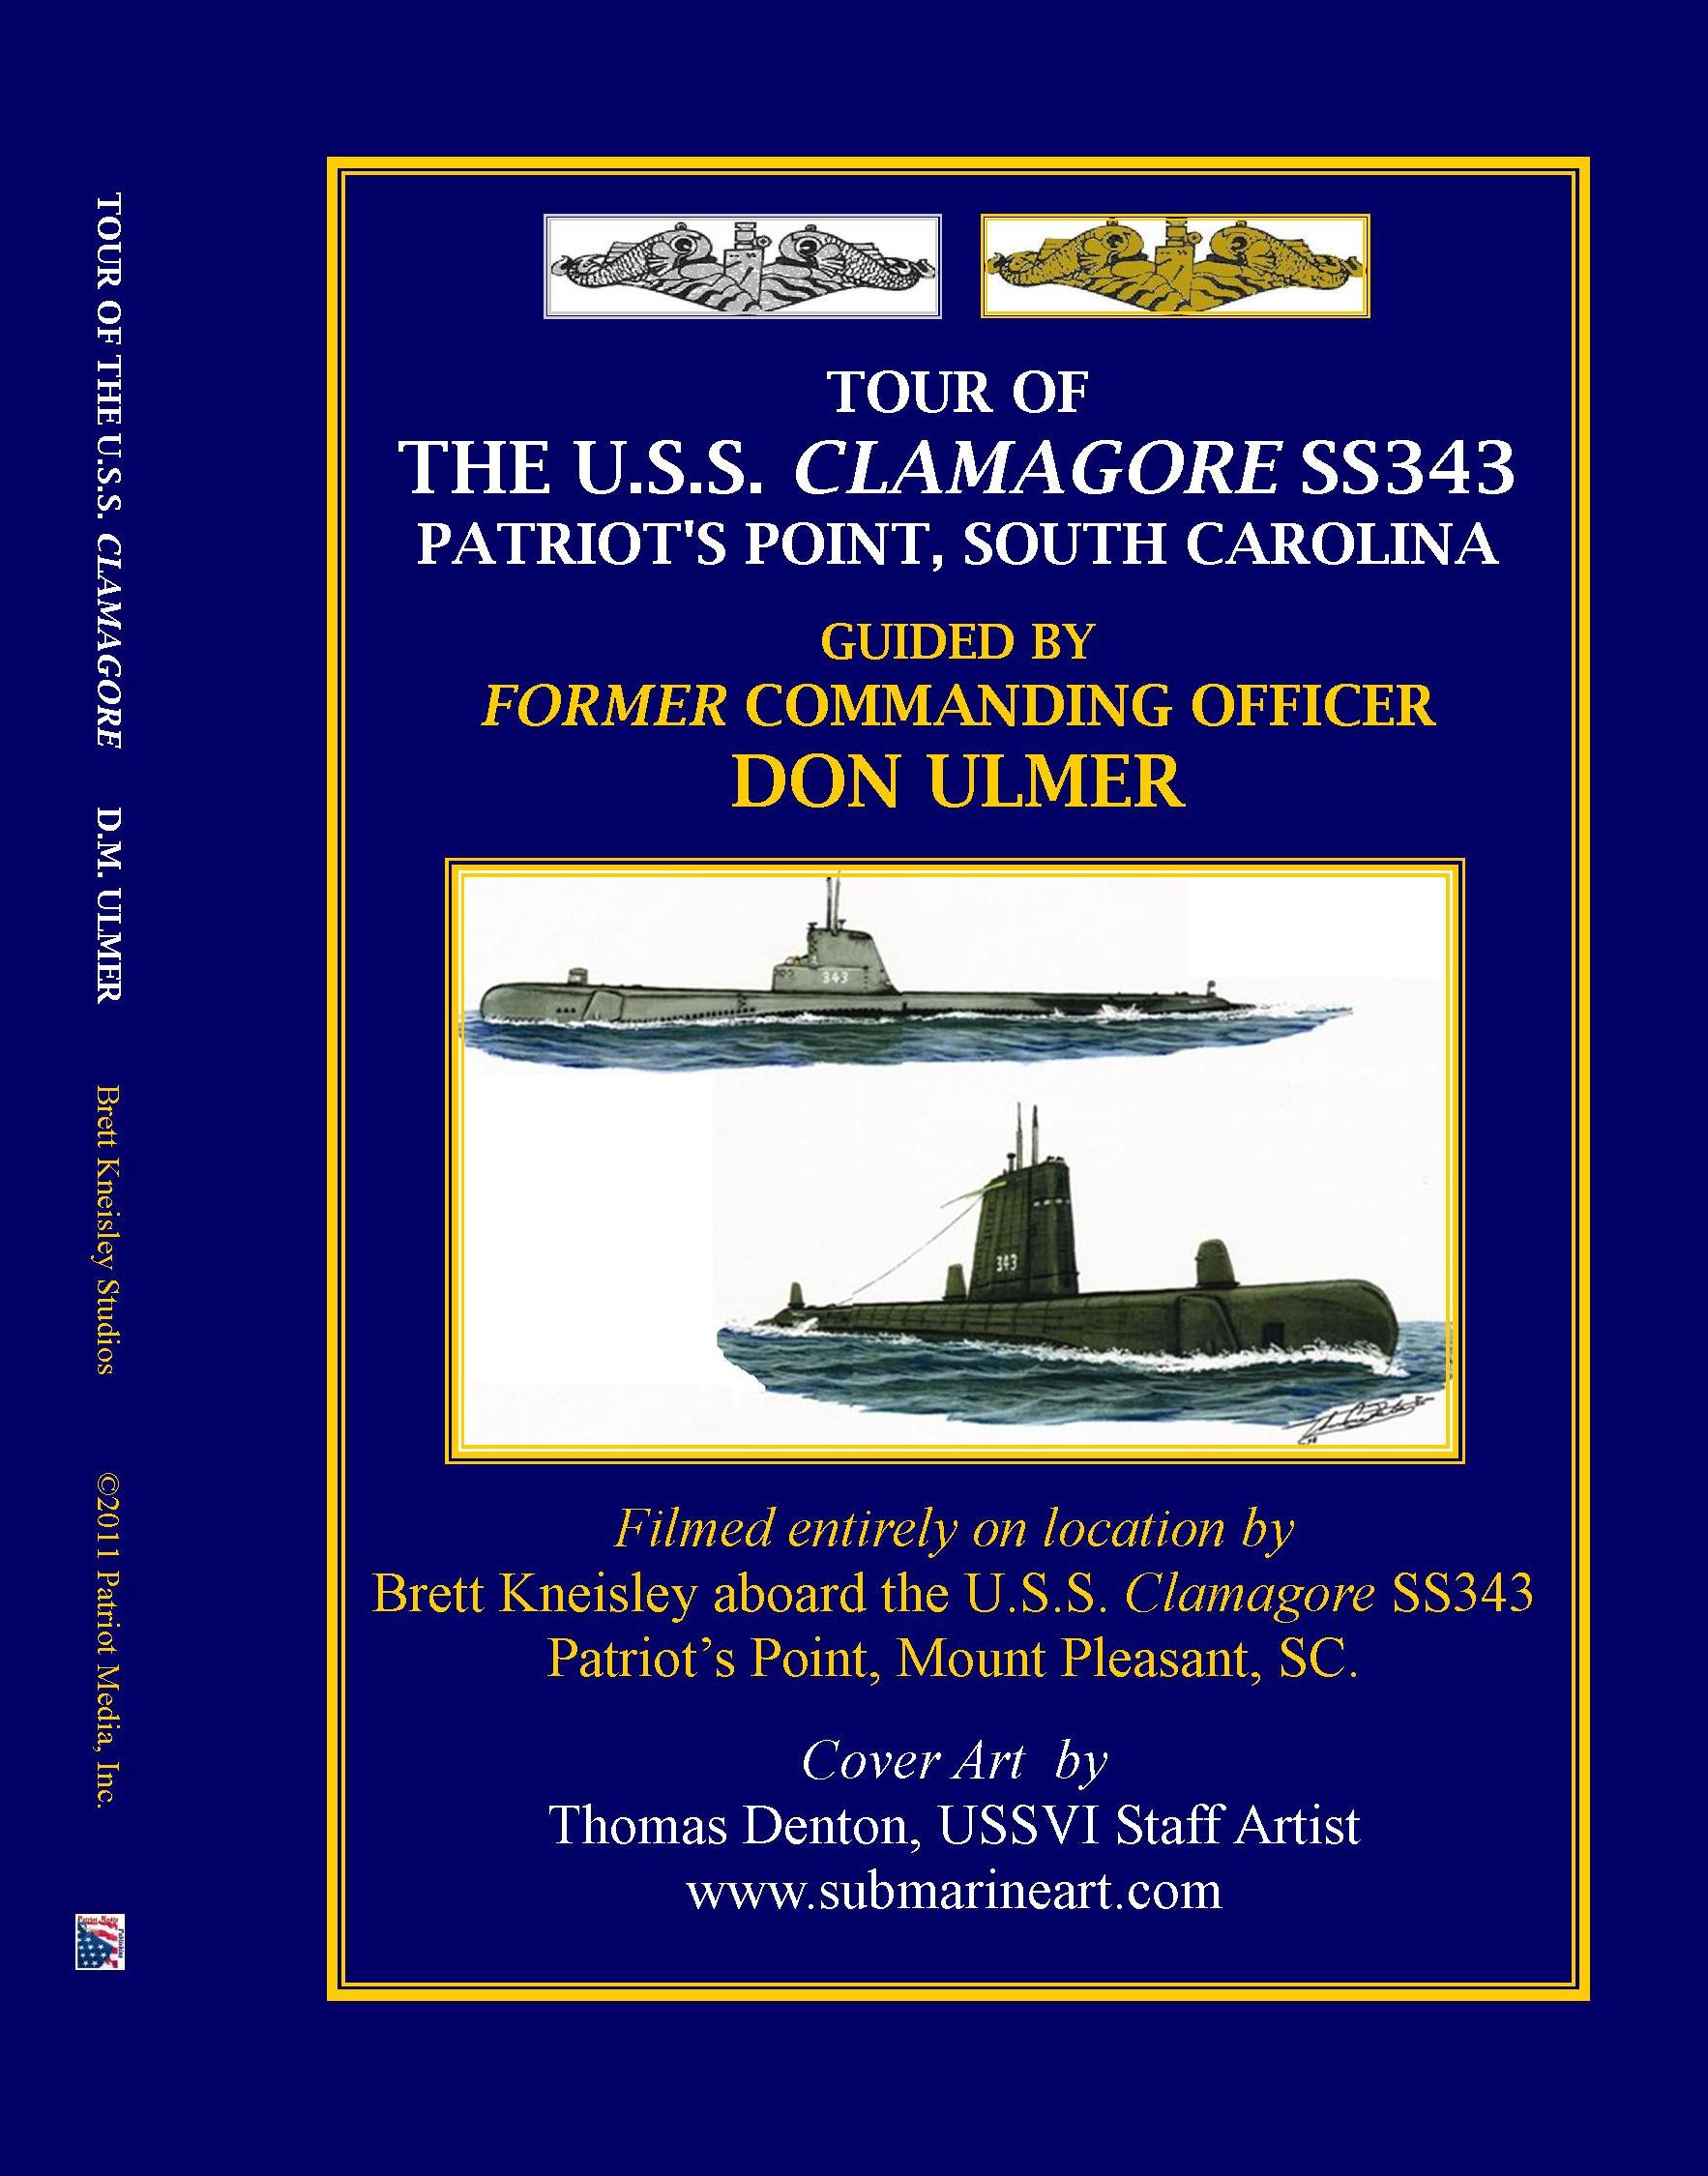 Tour of the U.S.S Clamagore Starring D.M. Ulmer